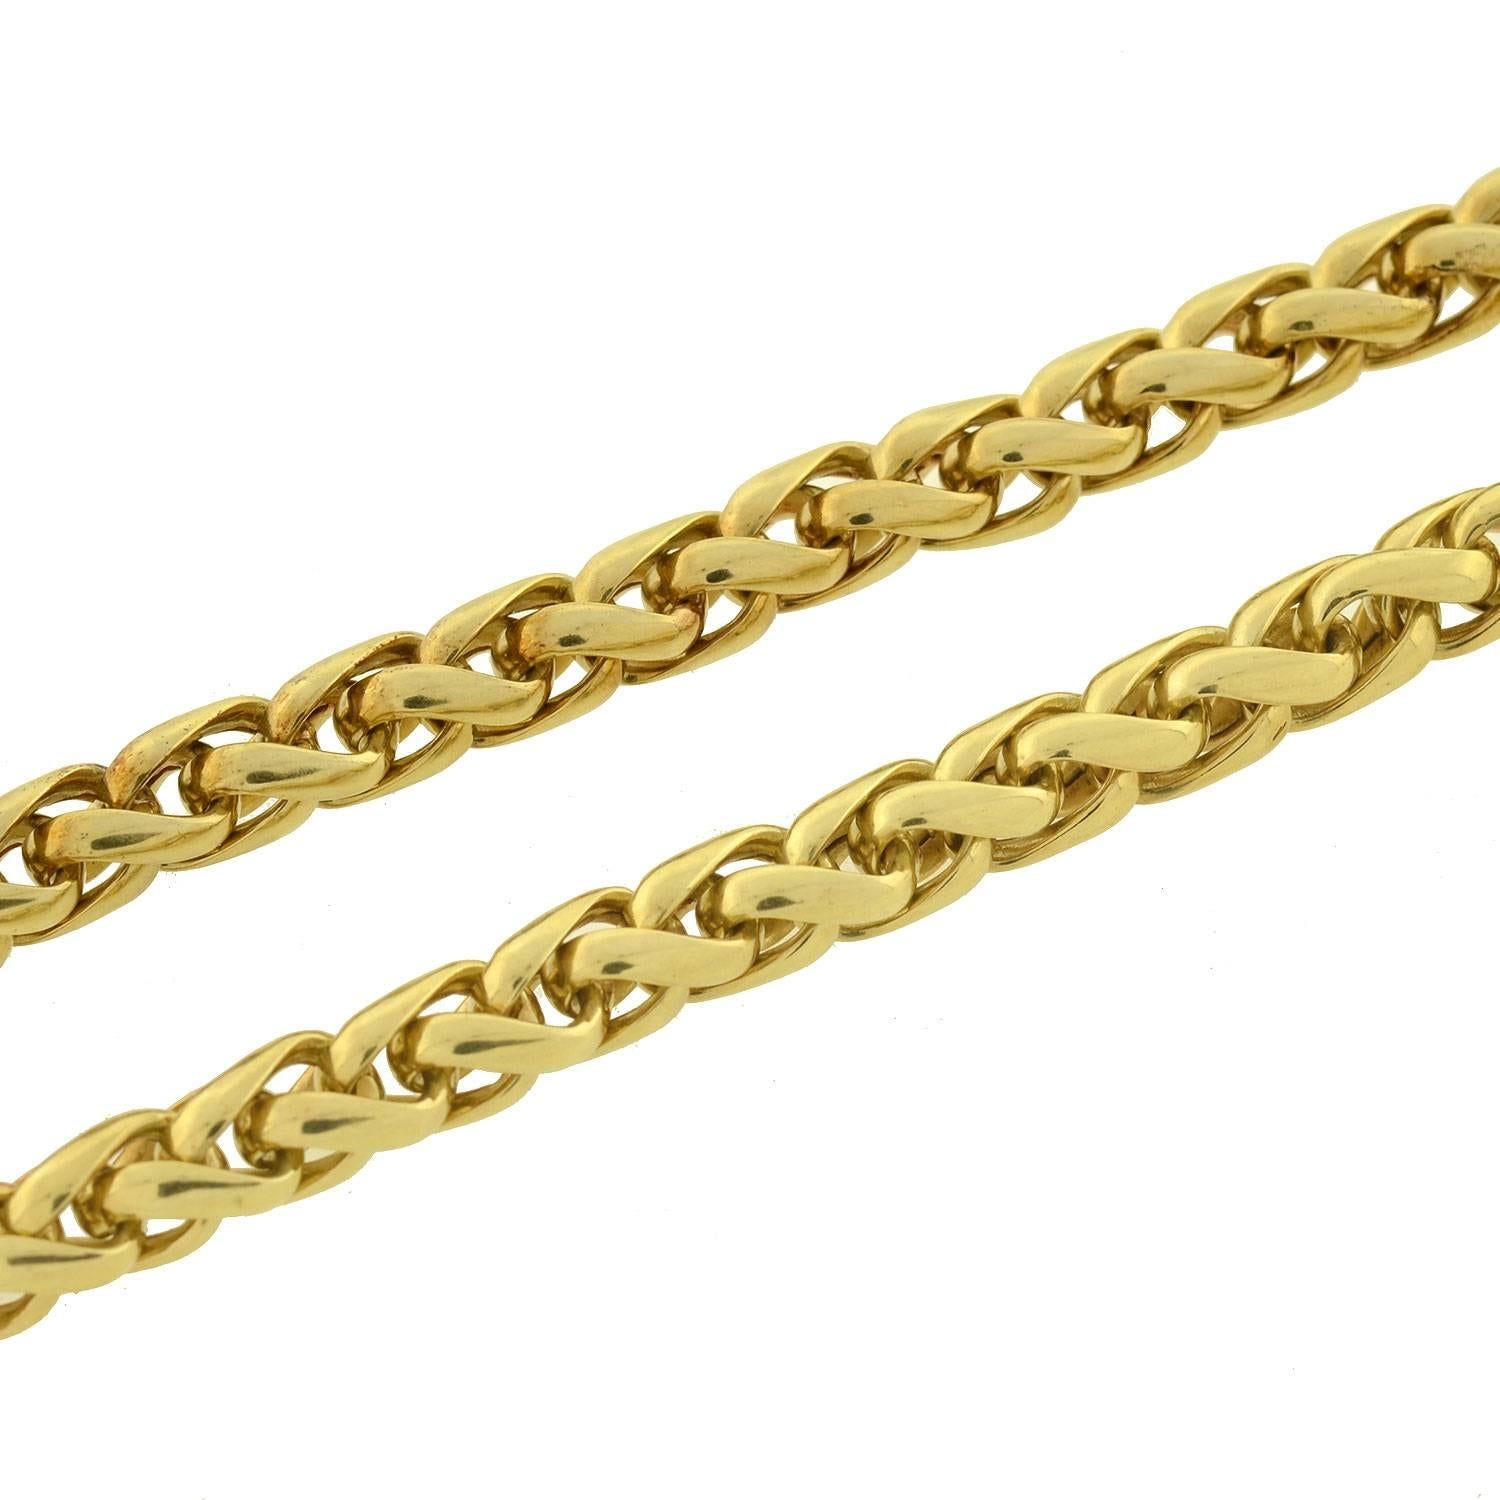 36 inch gold rope chain